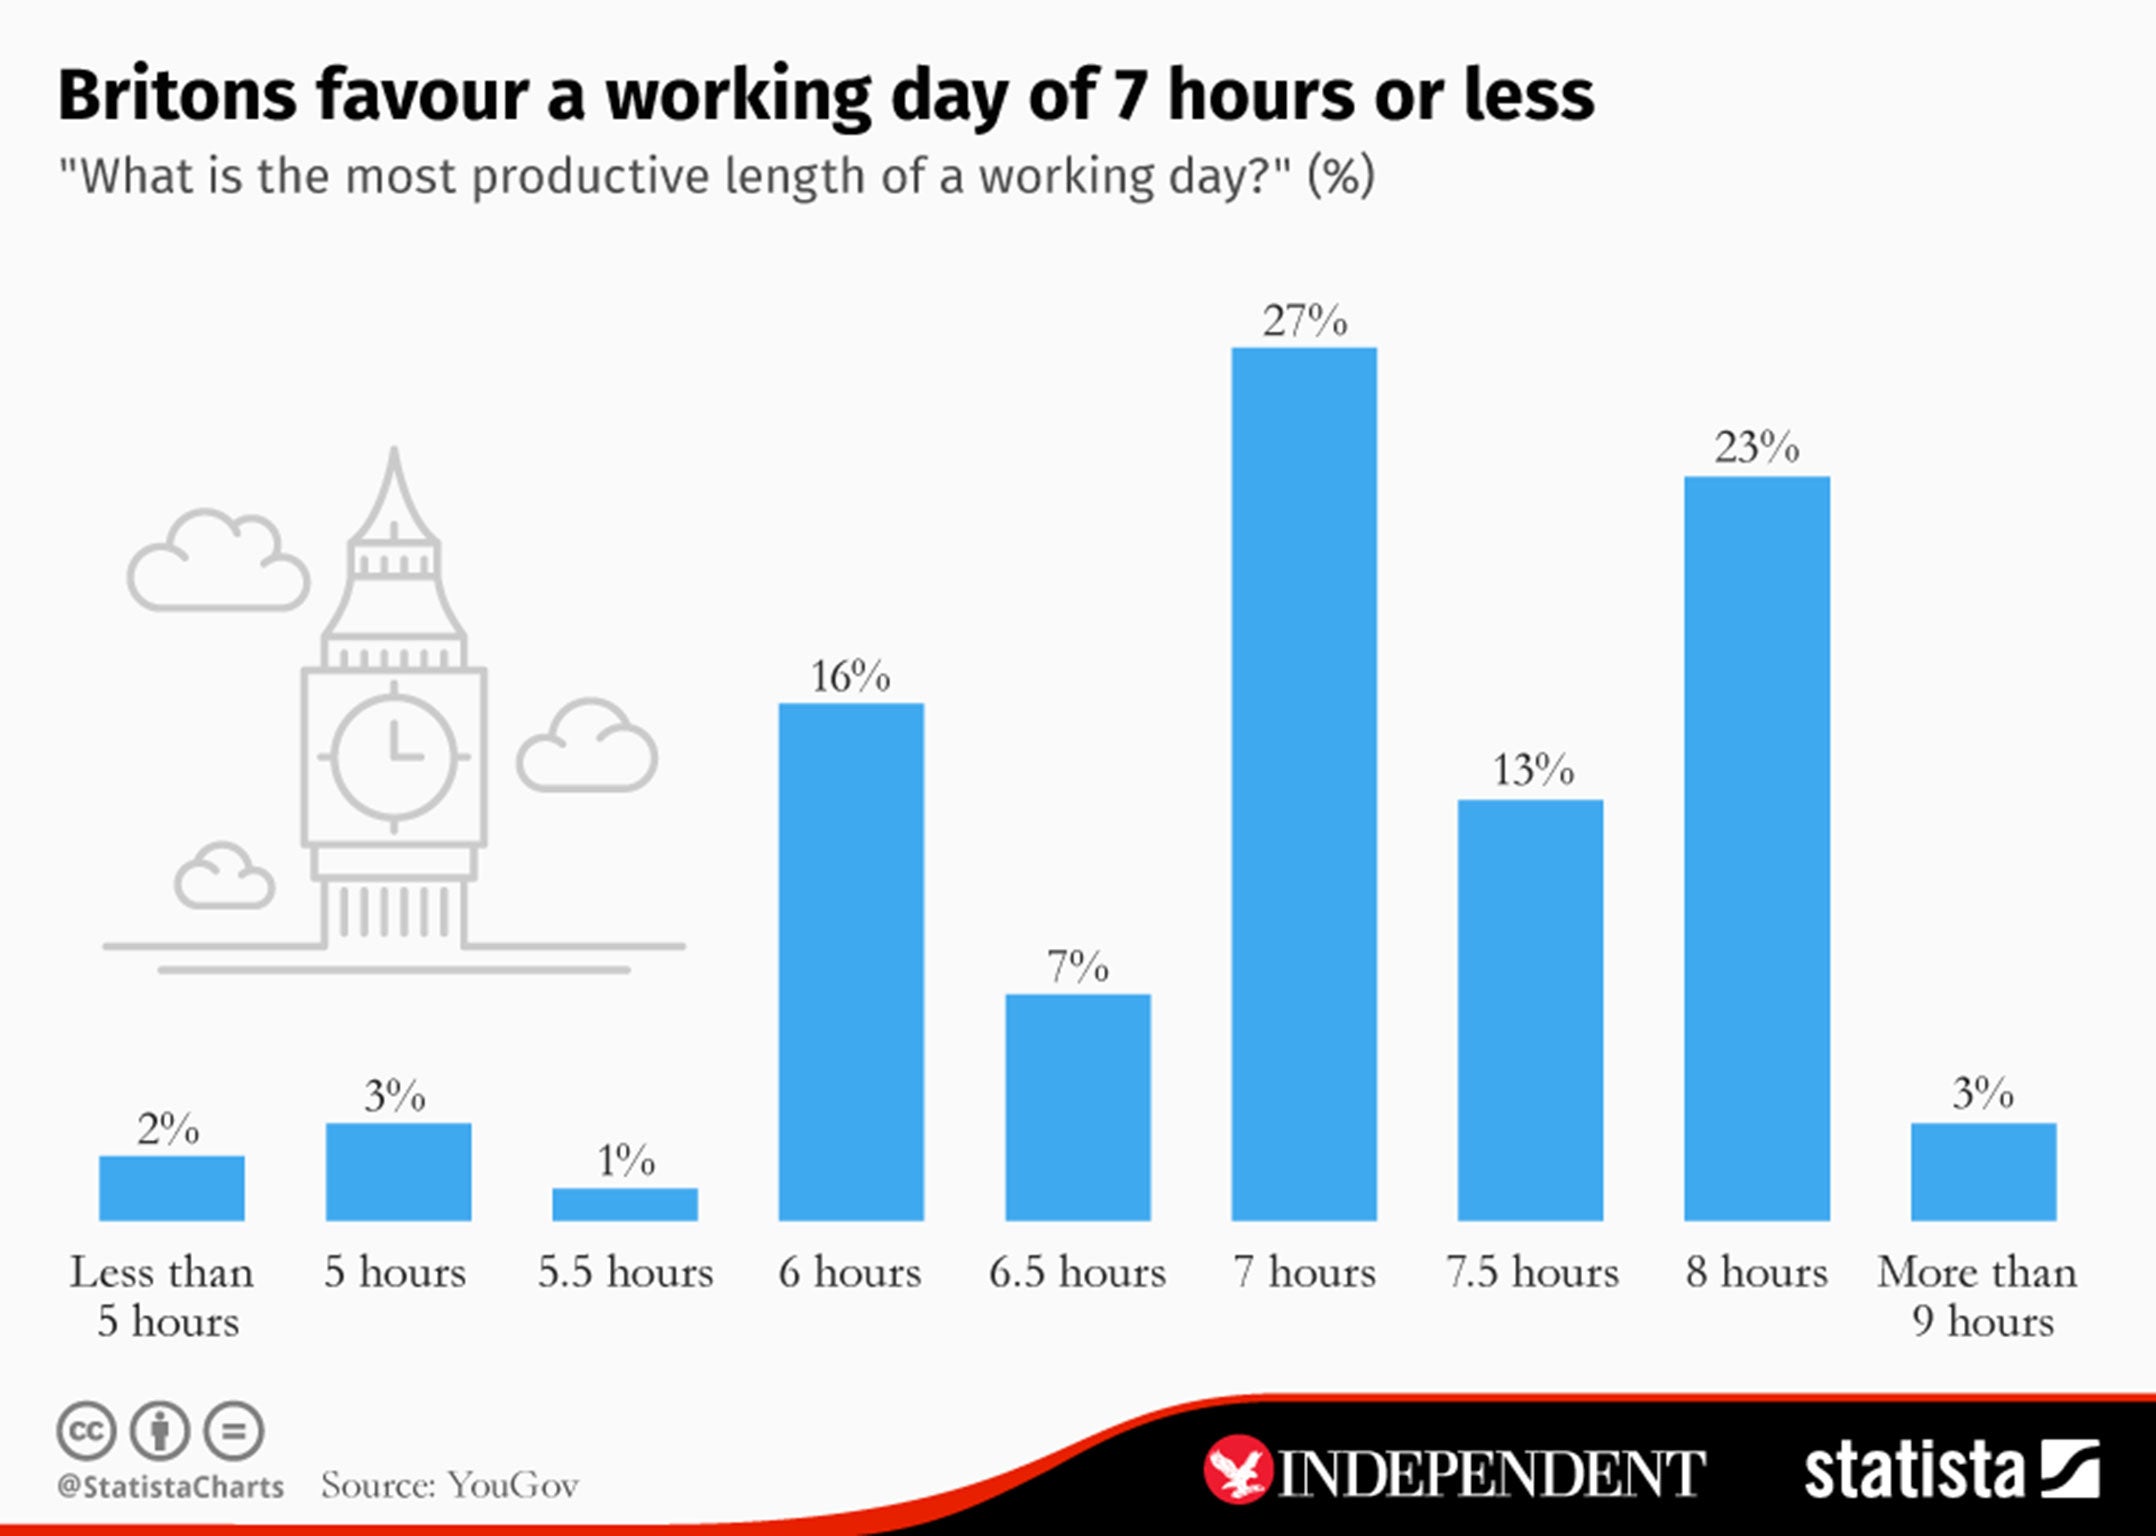 &#13;
This chart was created for The Independent by Statista&#13;